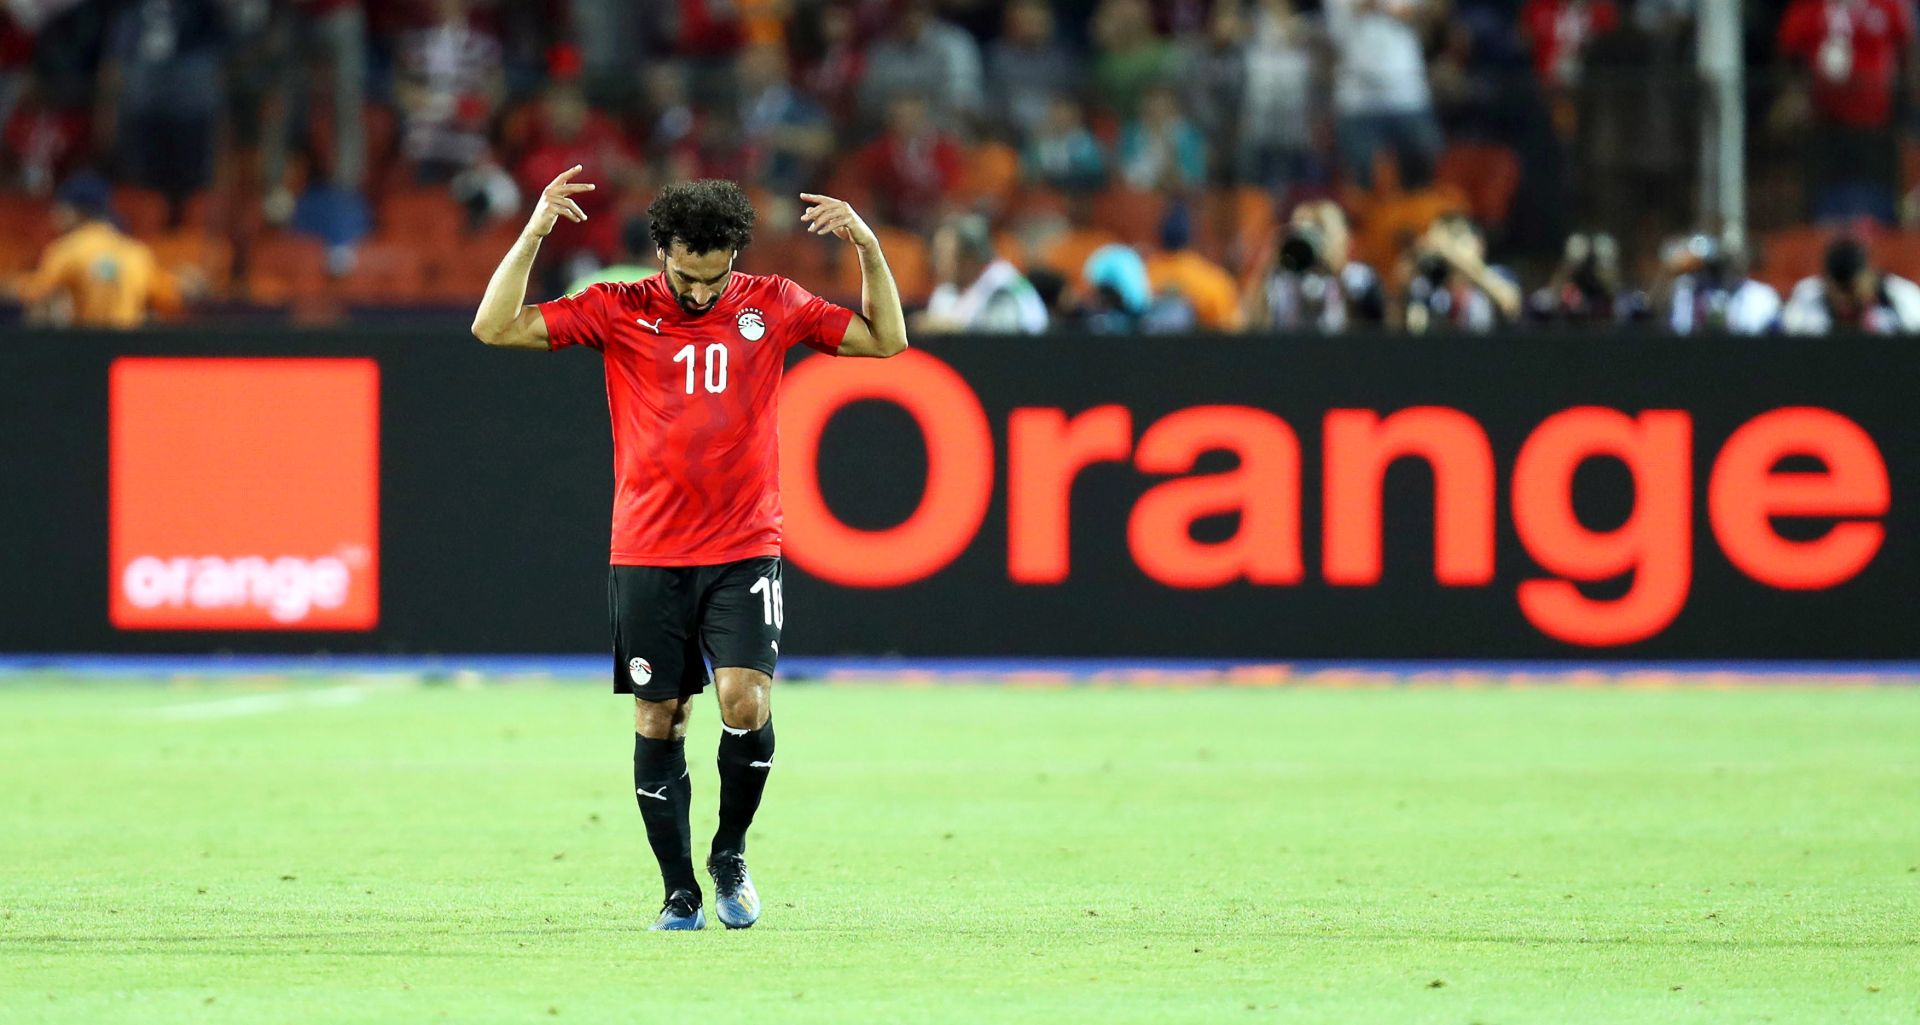 epa07675771 Egypt's Mohamed Salah celebrates after scoring the 2-0 lead during the 2019 Africa Cup of Nations (AFCON) group A soccer between Egypt and DR Congo in Cairo, Egypt, 26 June 2019.  EPA/SAMUEL SHIVAMBU